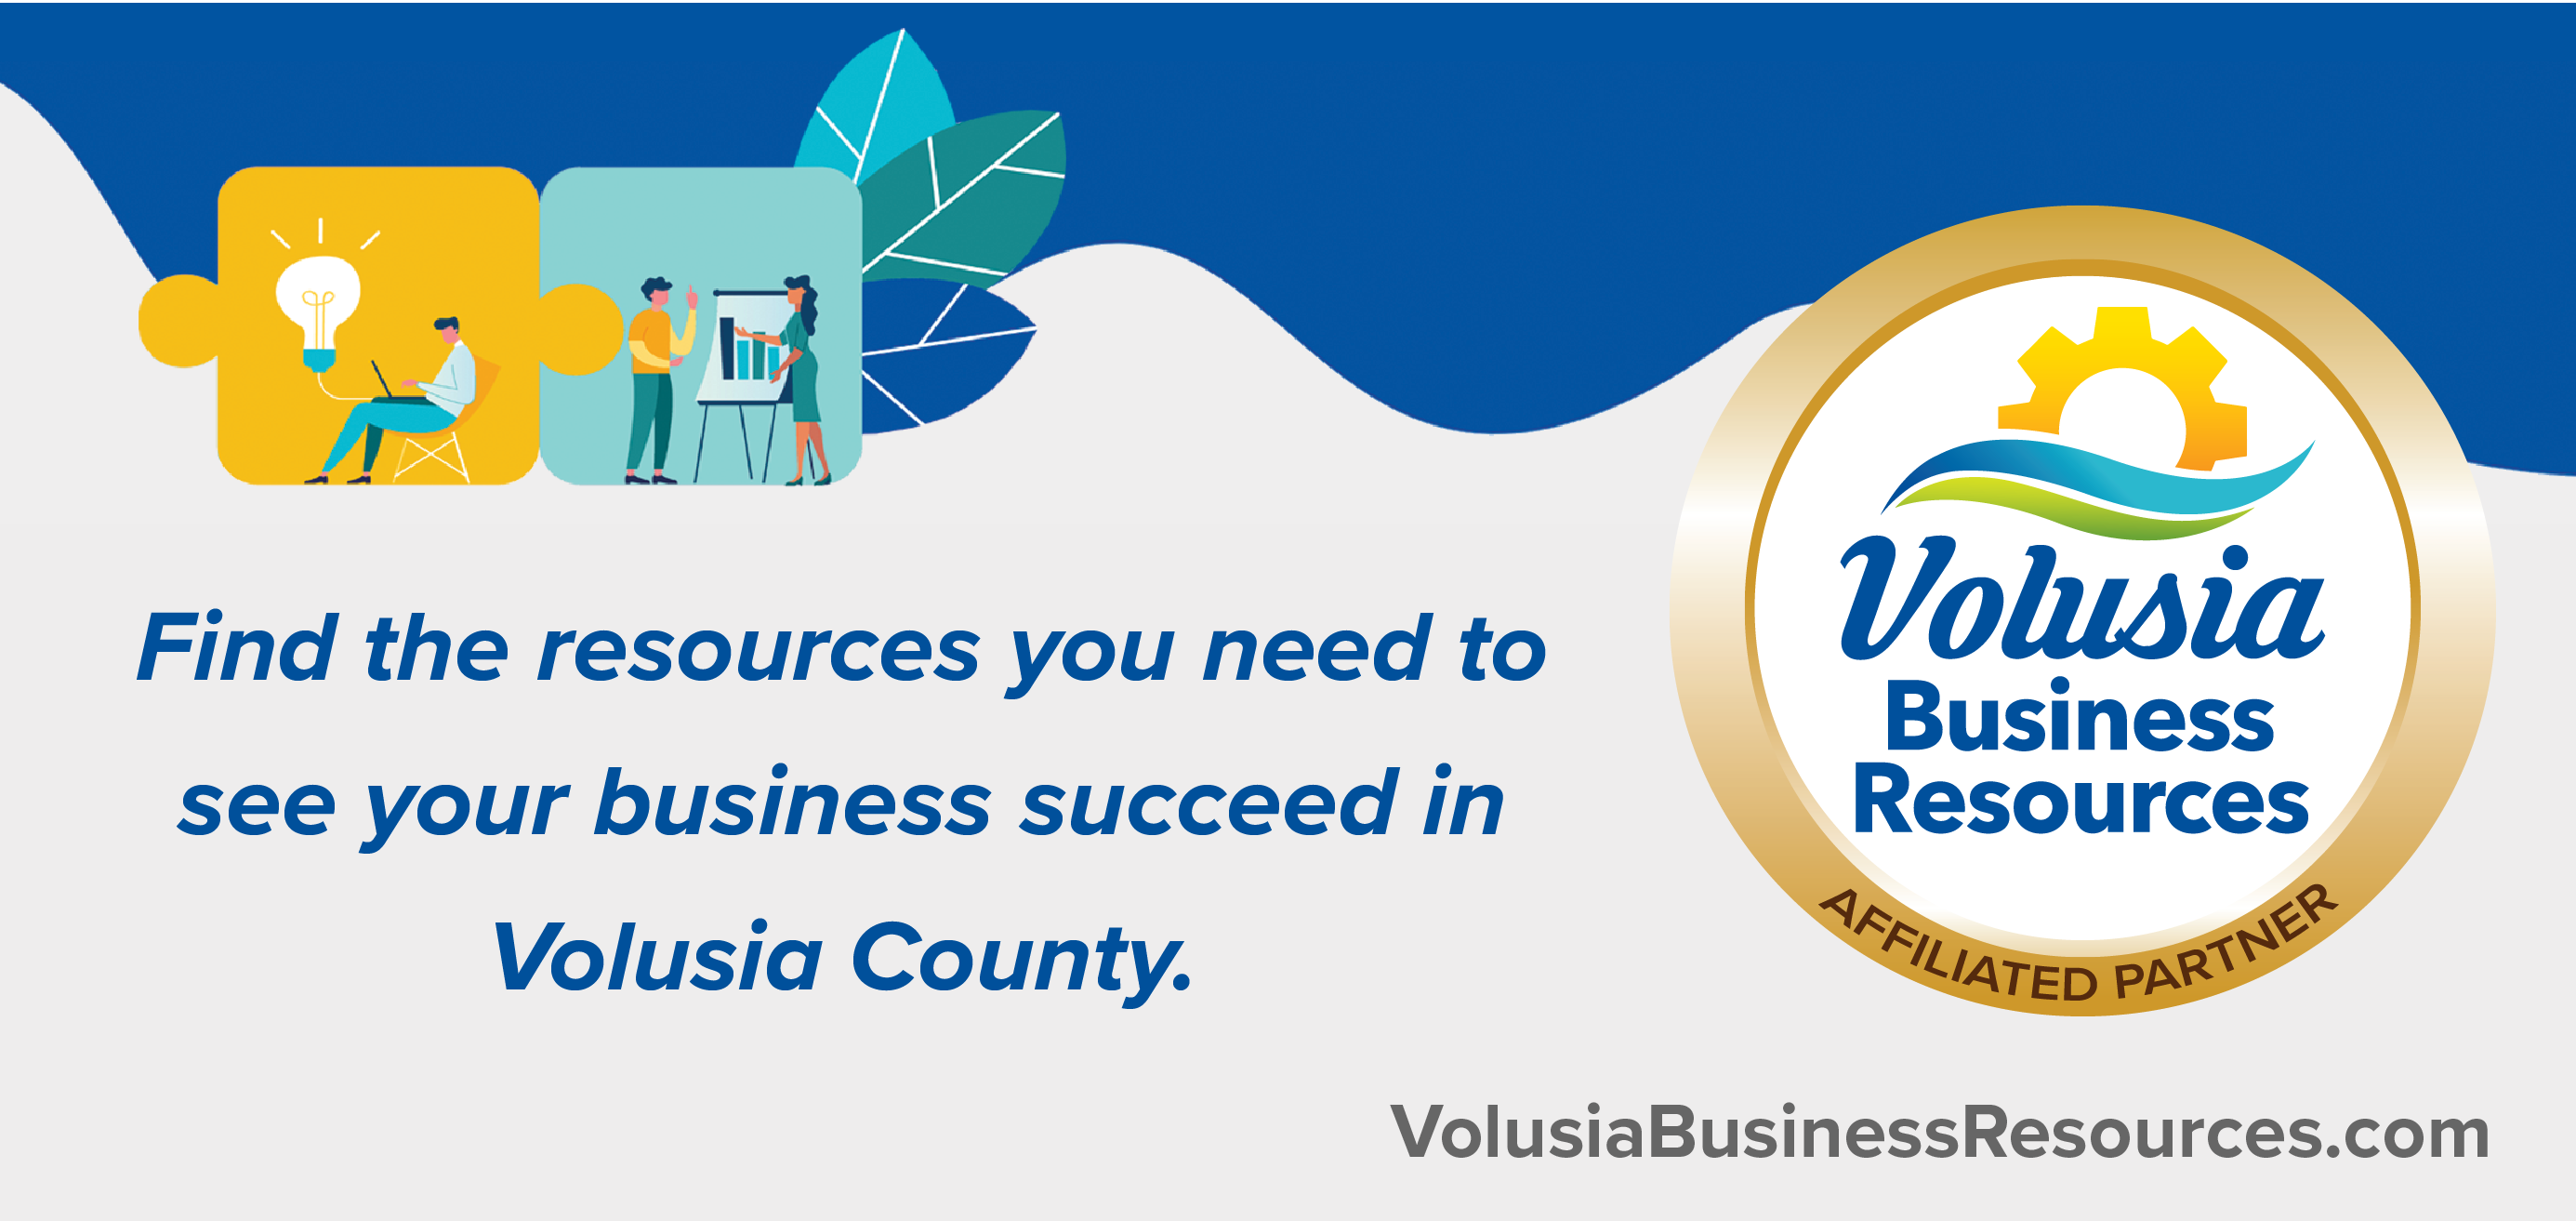 volusia business resources find the resources you need to see your business succeed in volusia county